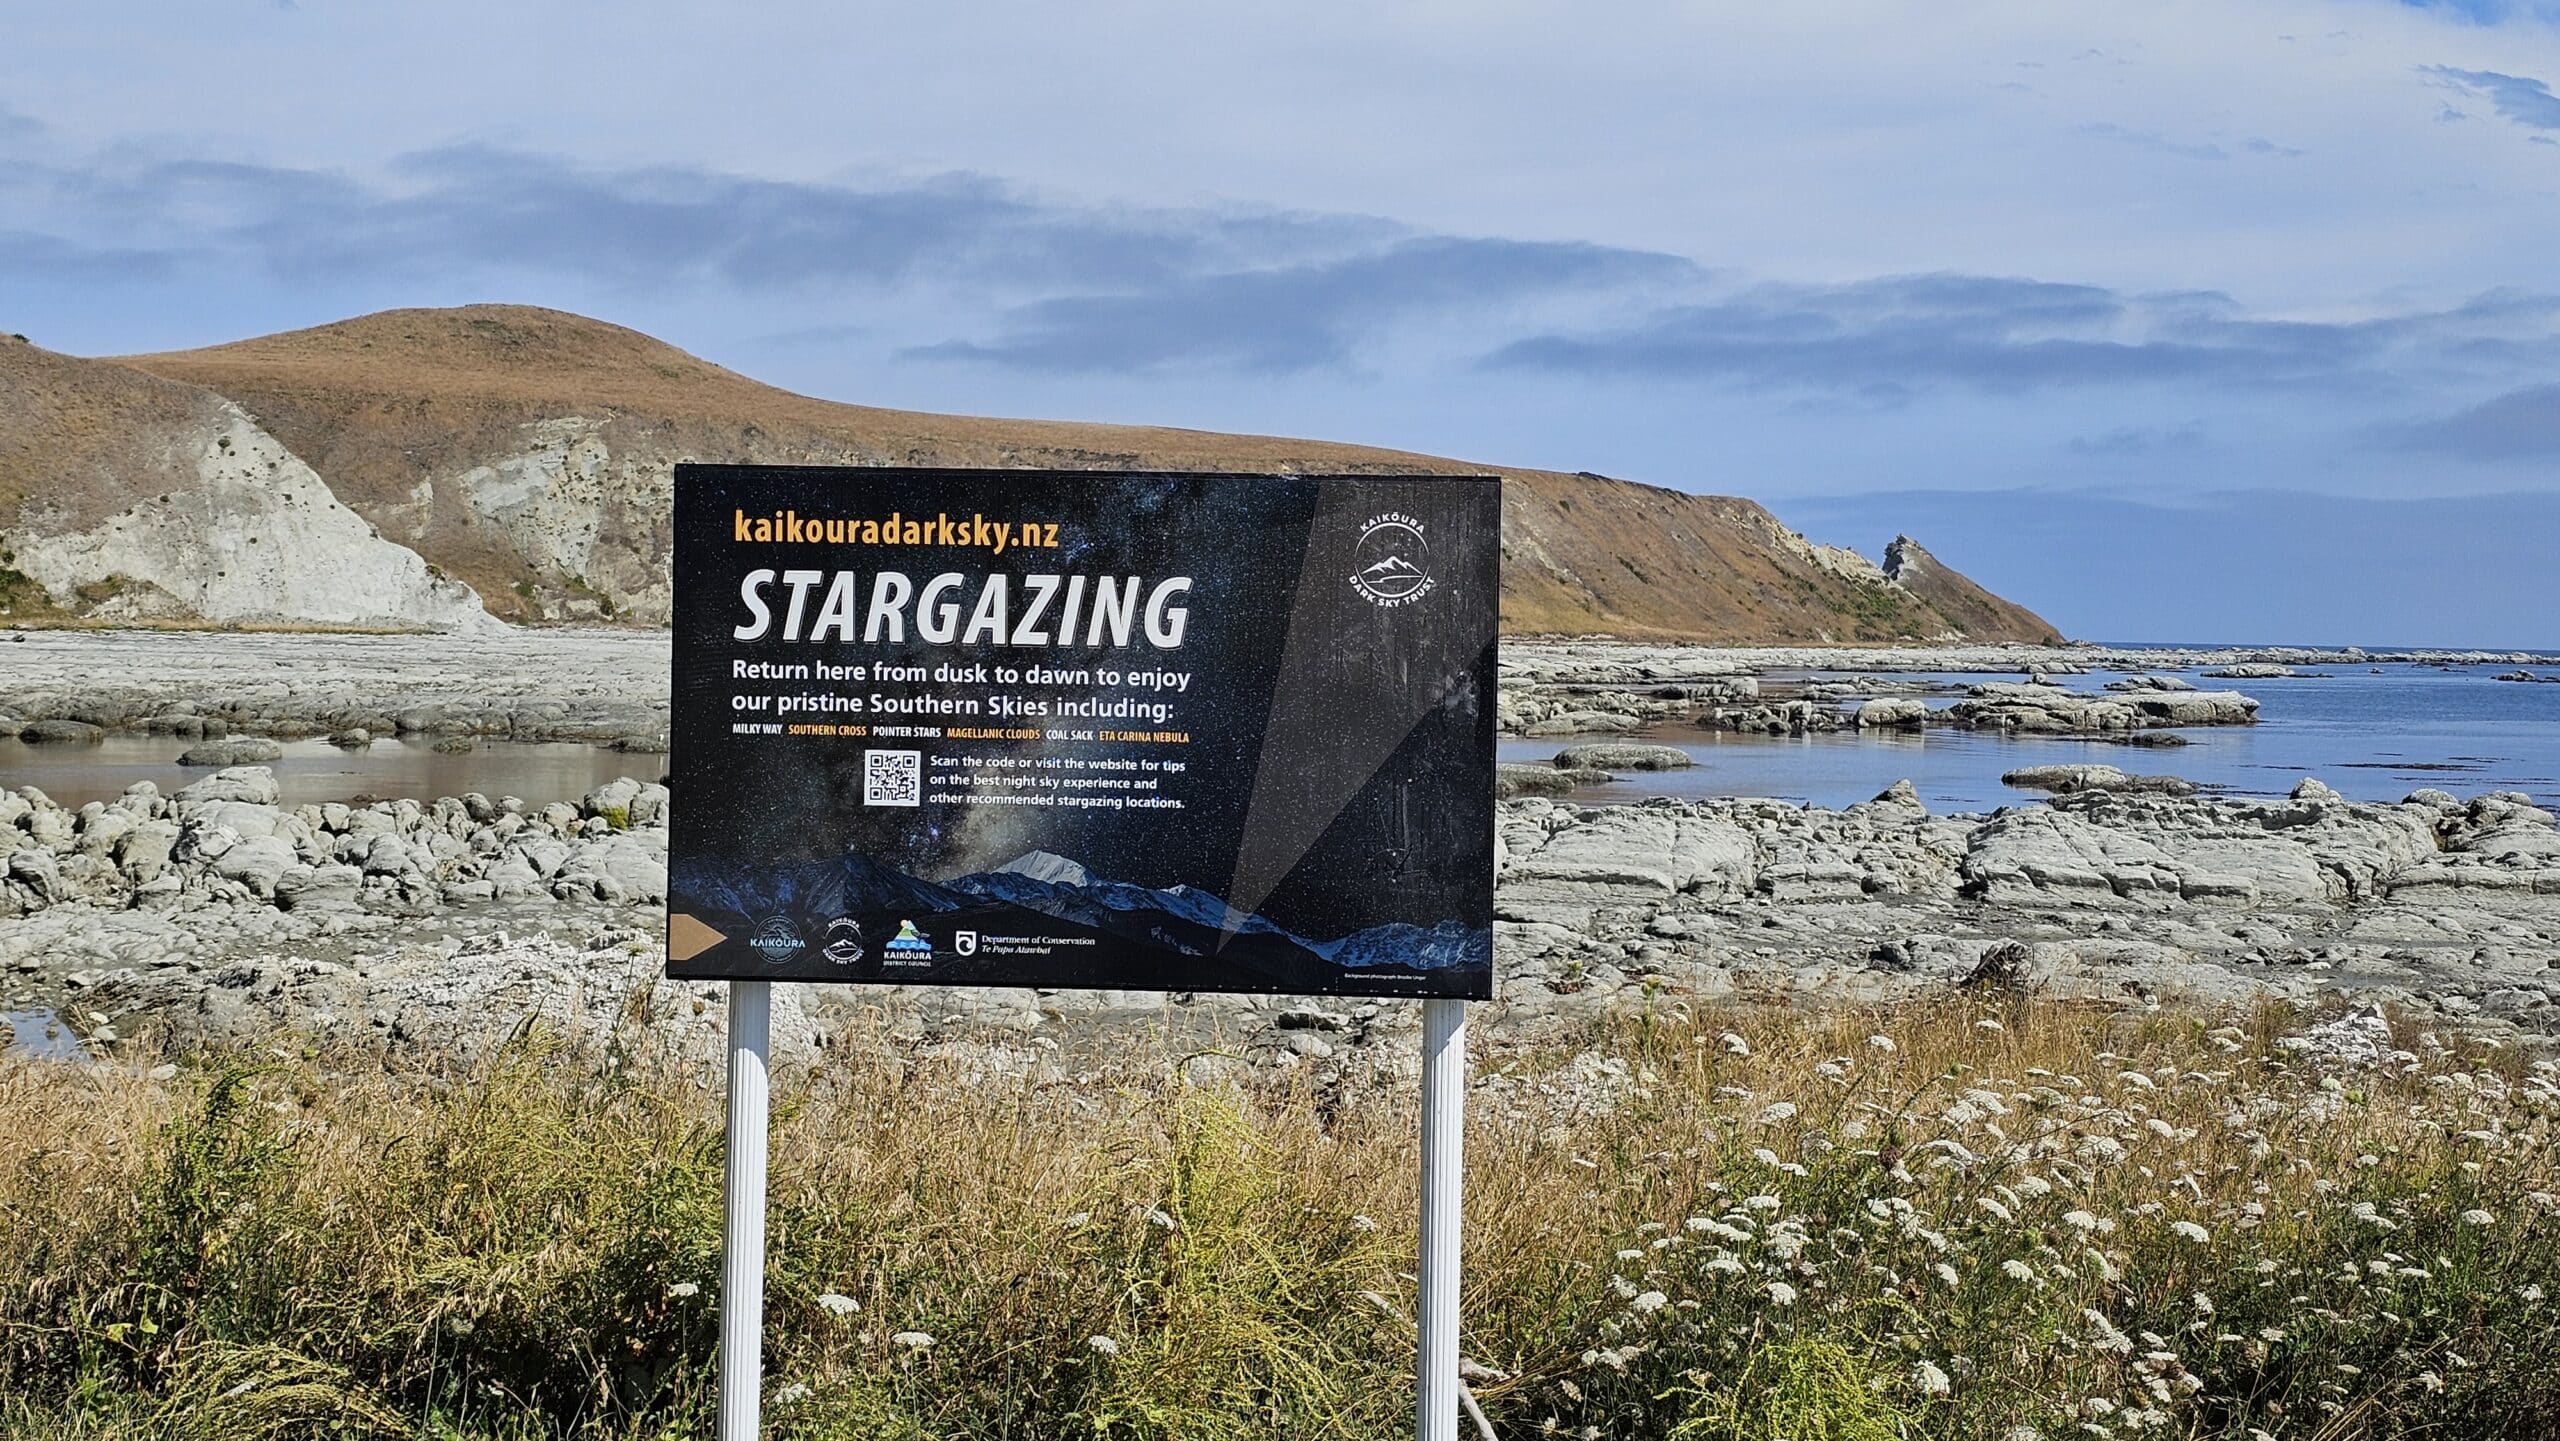 Stargazing signs help promote the enjoyment of our night sky